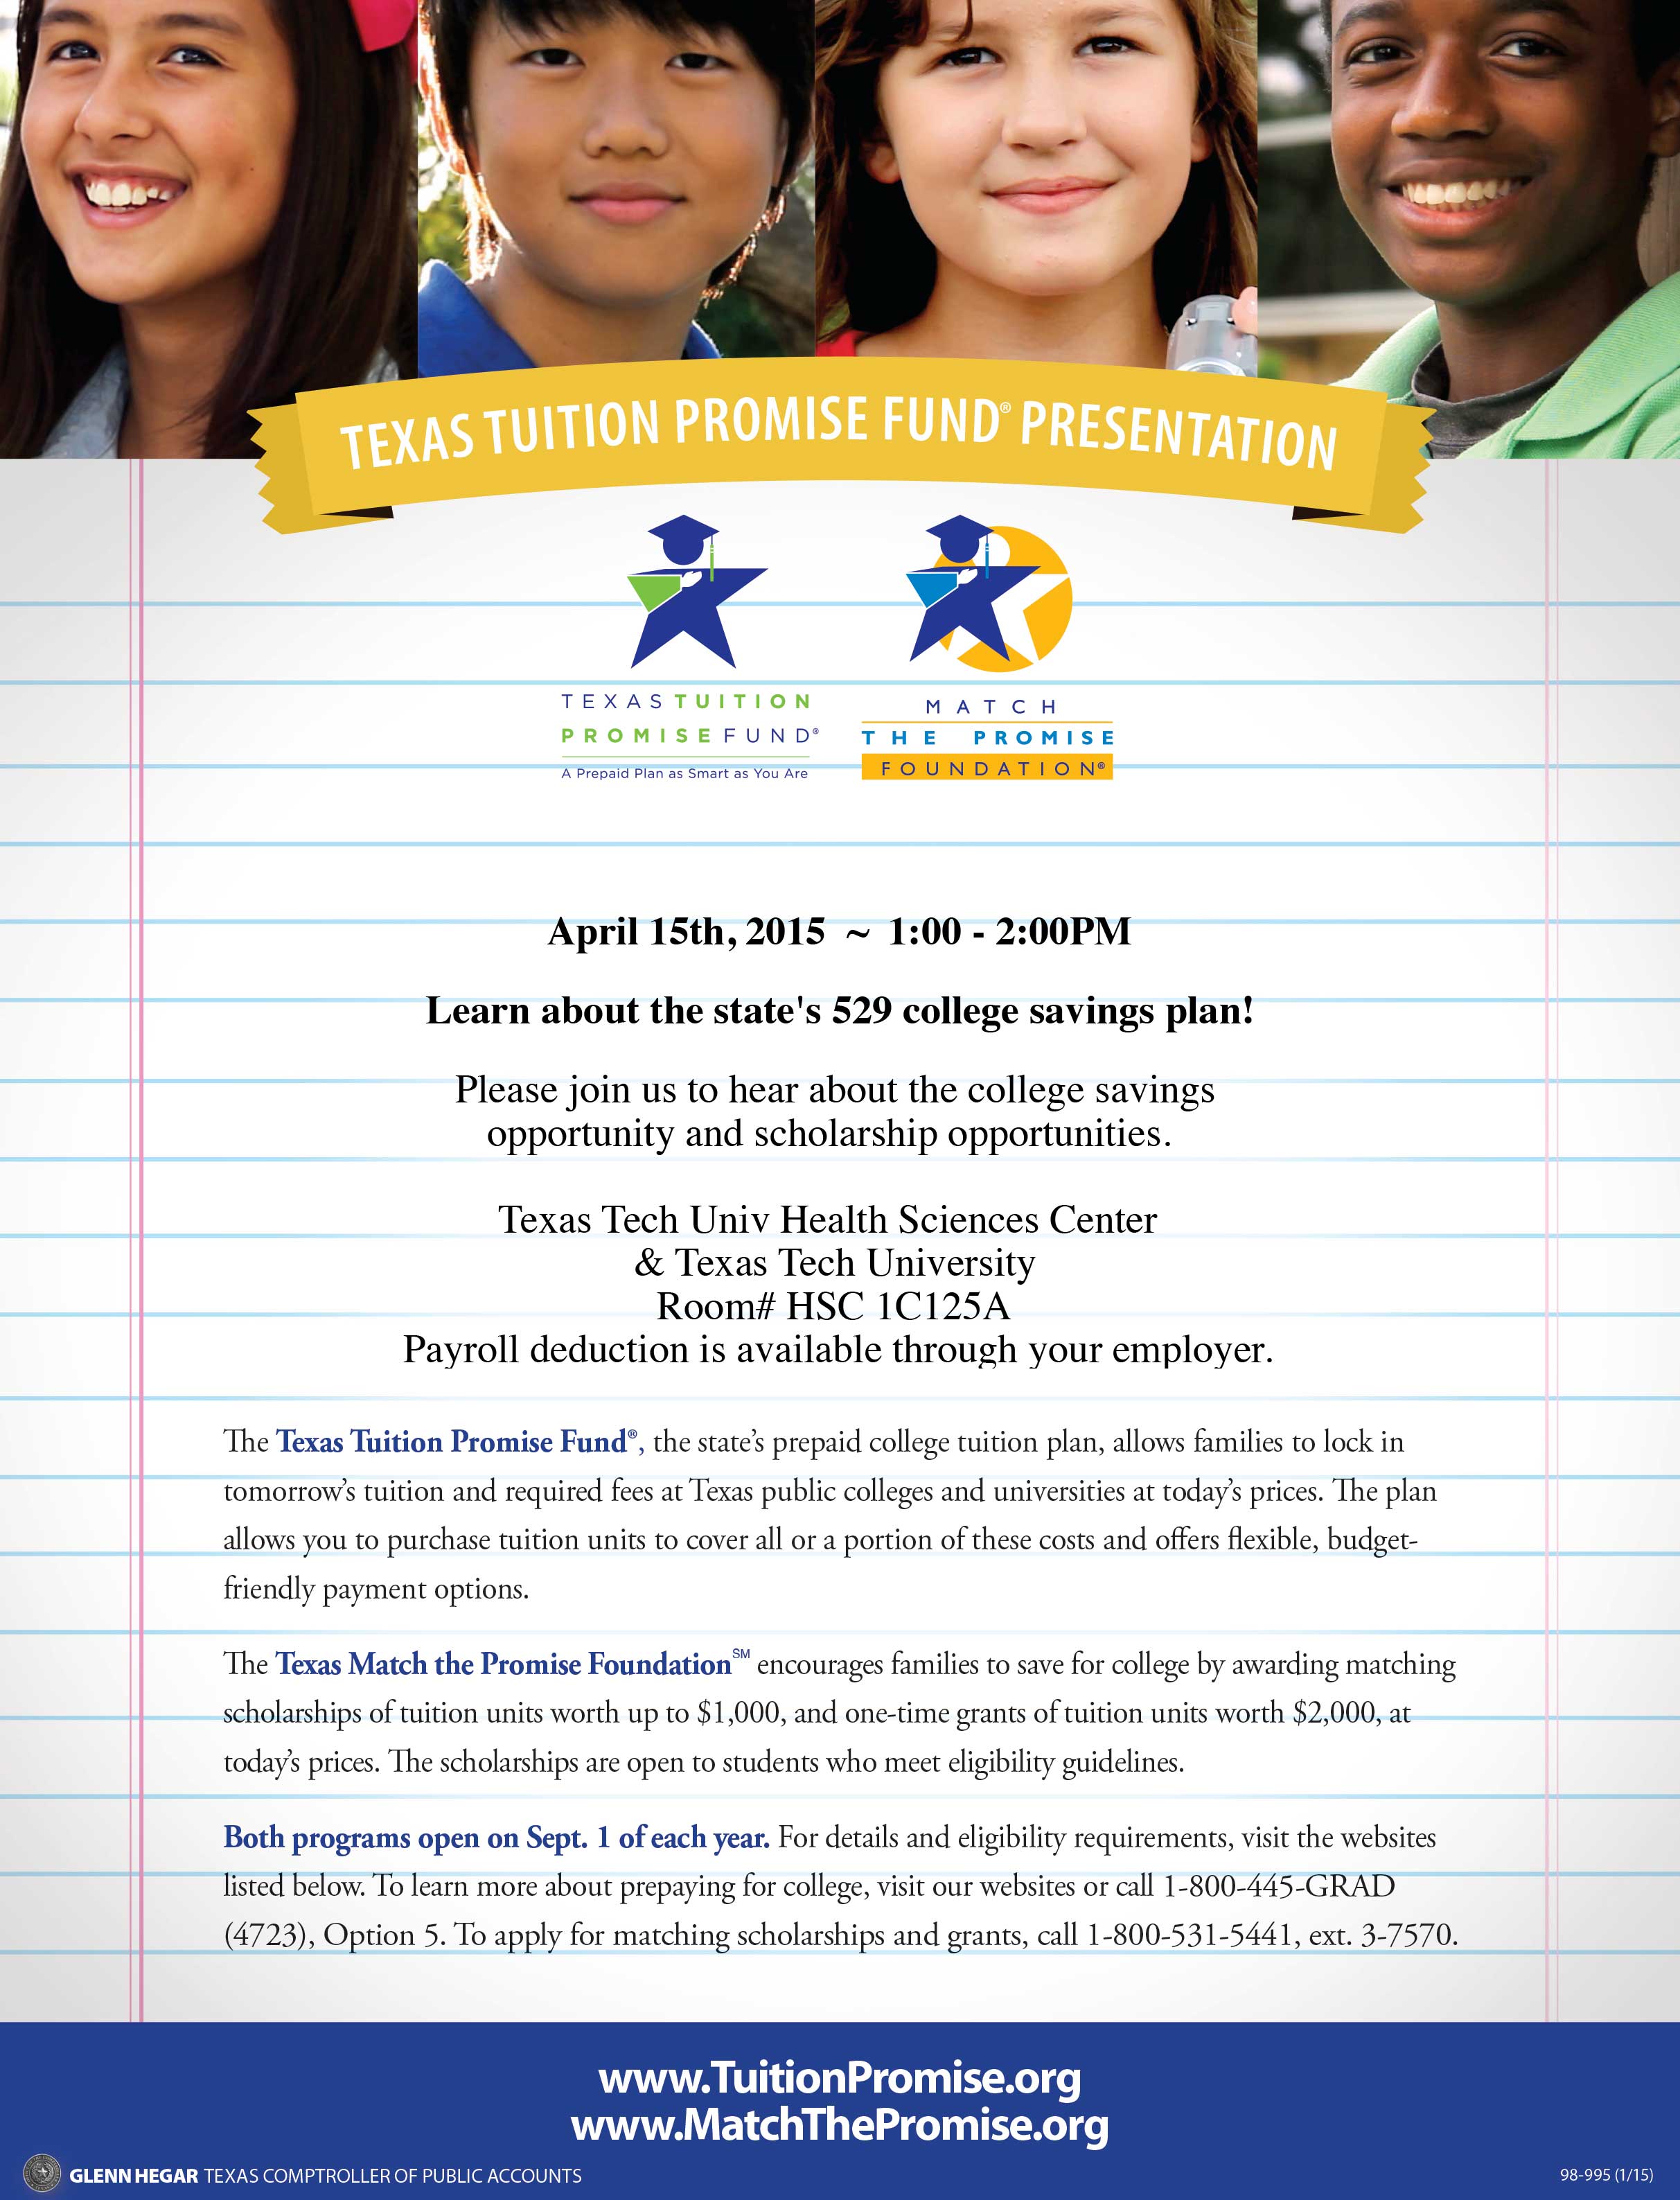 
TX Tuition Promise (College) Fund Presentation - 4/15/15 
